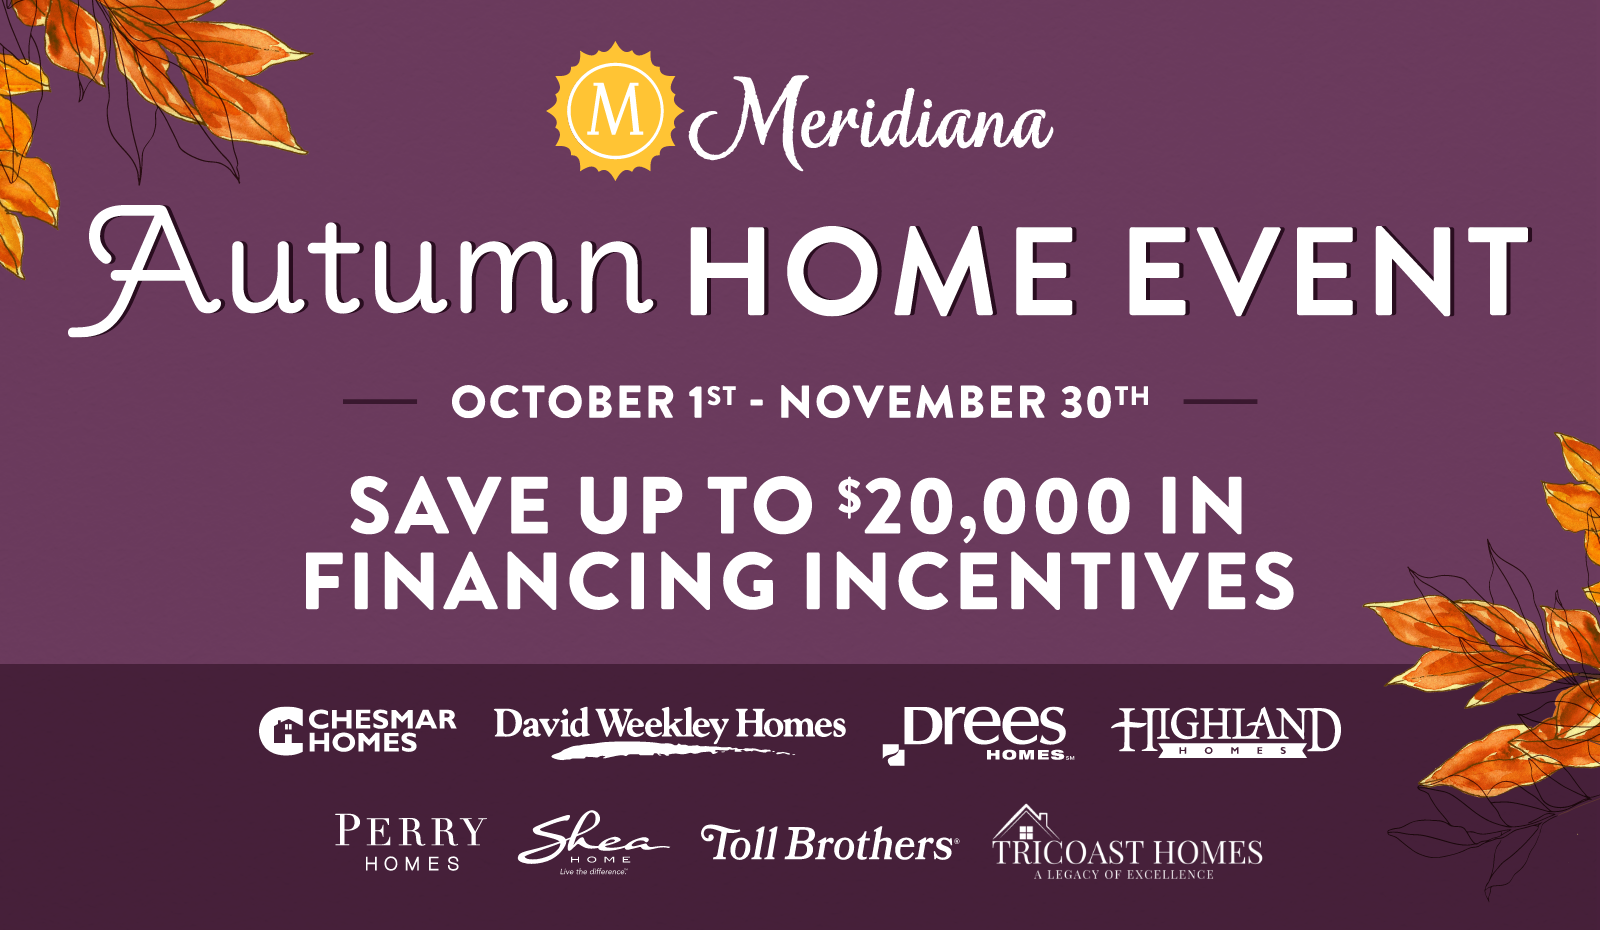 Save Up to $20k During Meridiana’s Autumn Home Event